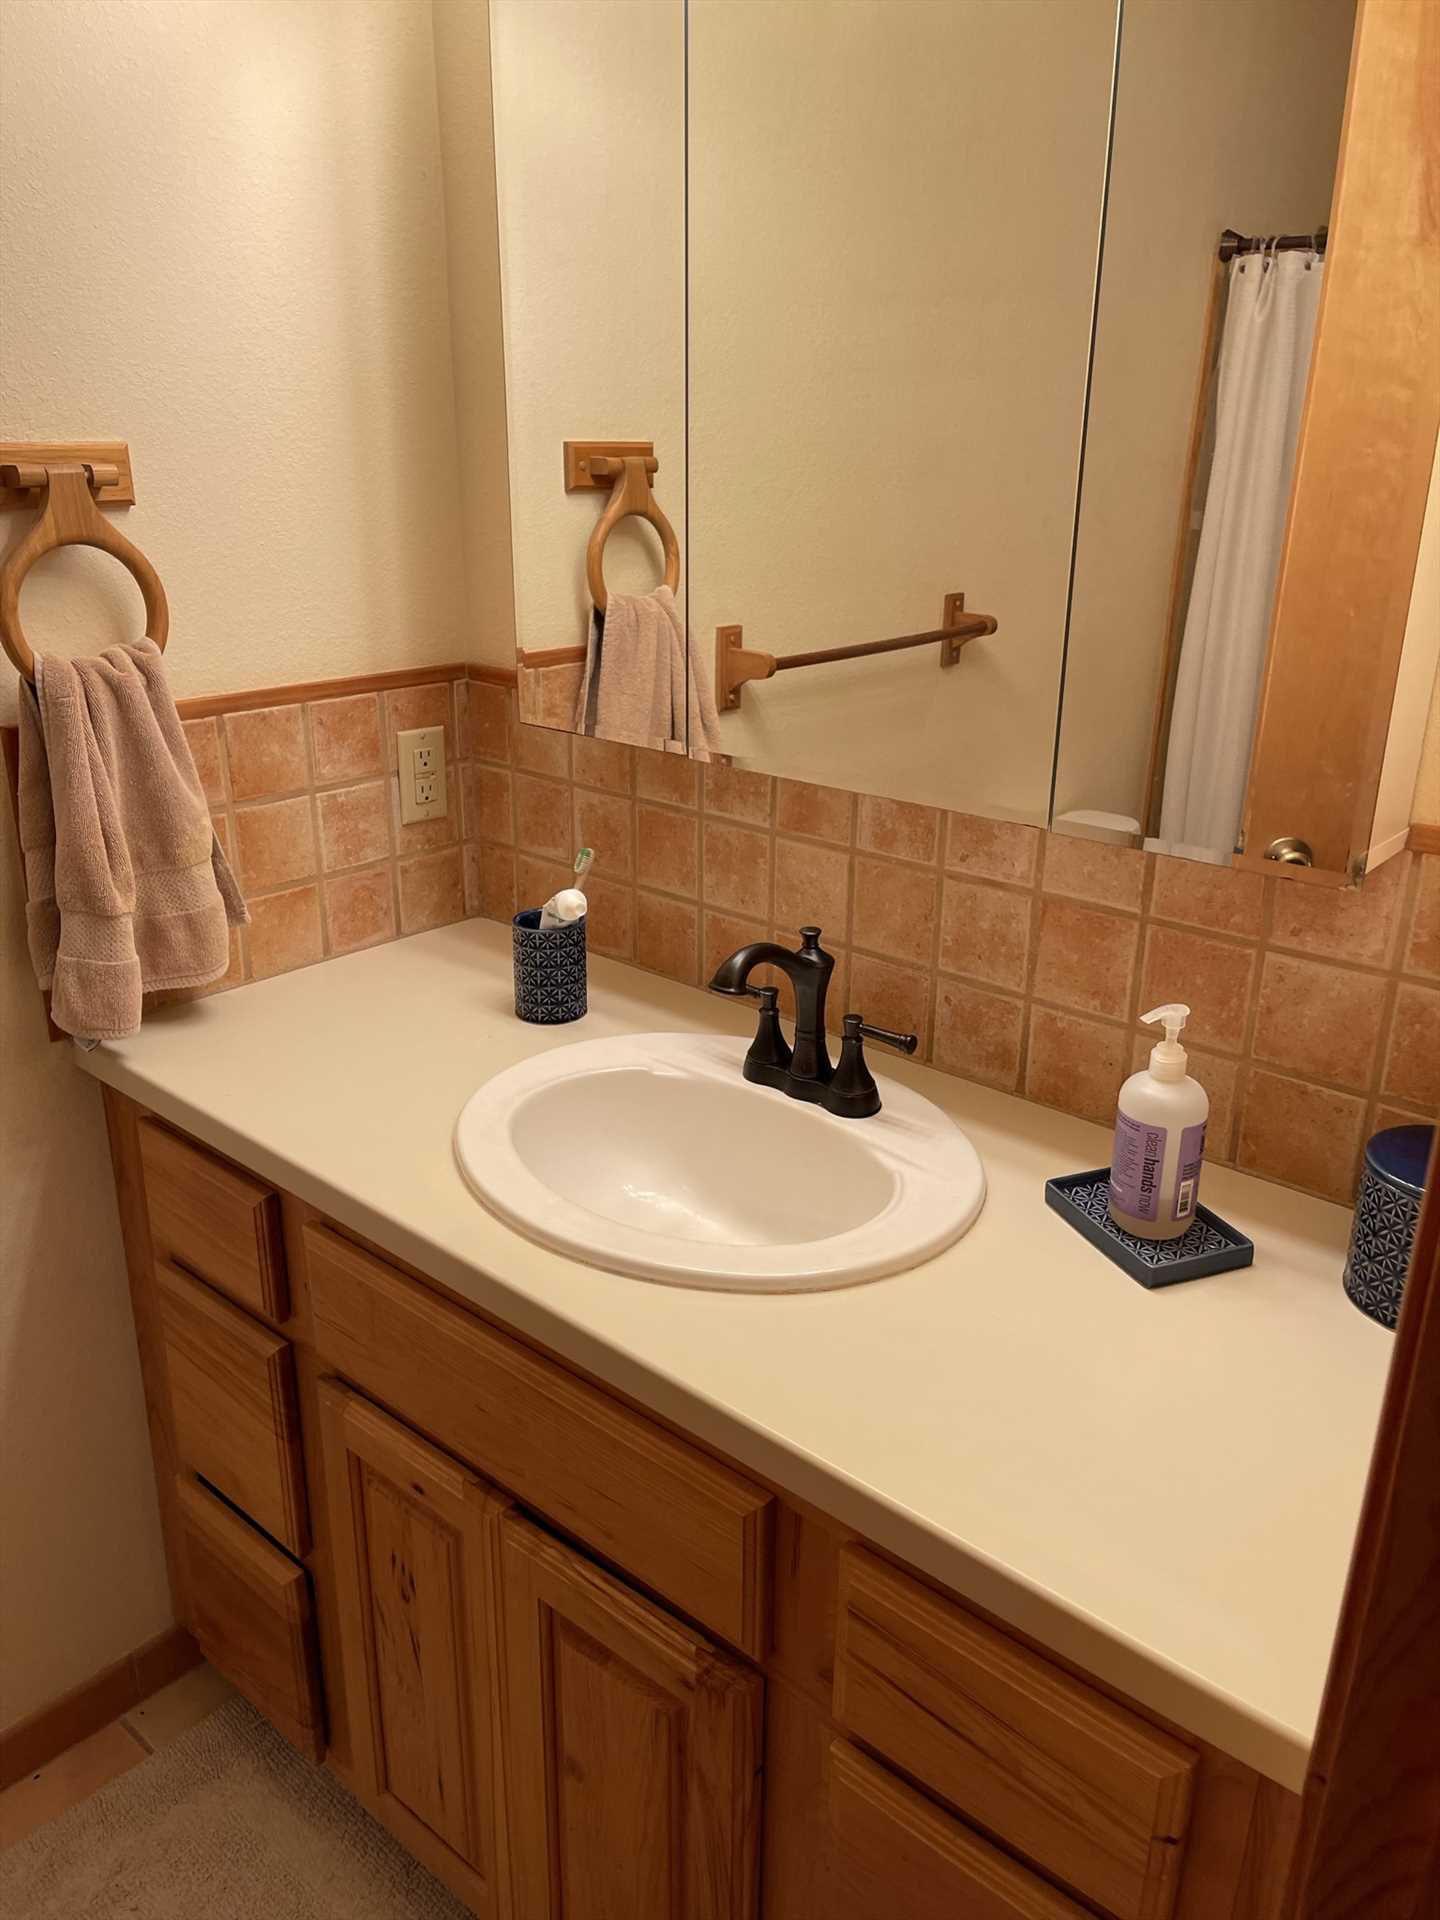                                                 The Texas Longhorn Cabin has two full baths (the master bath is pictured here), and both come with basic toiletries and clean and fresh linens!